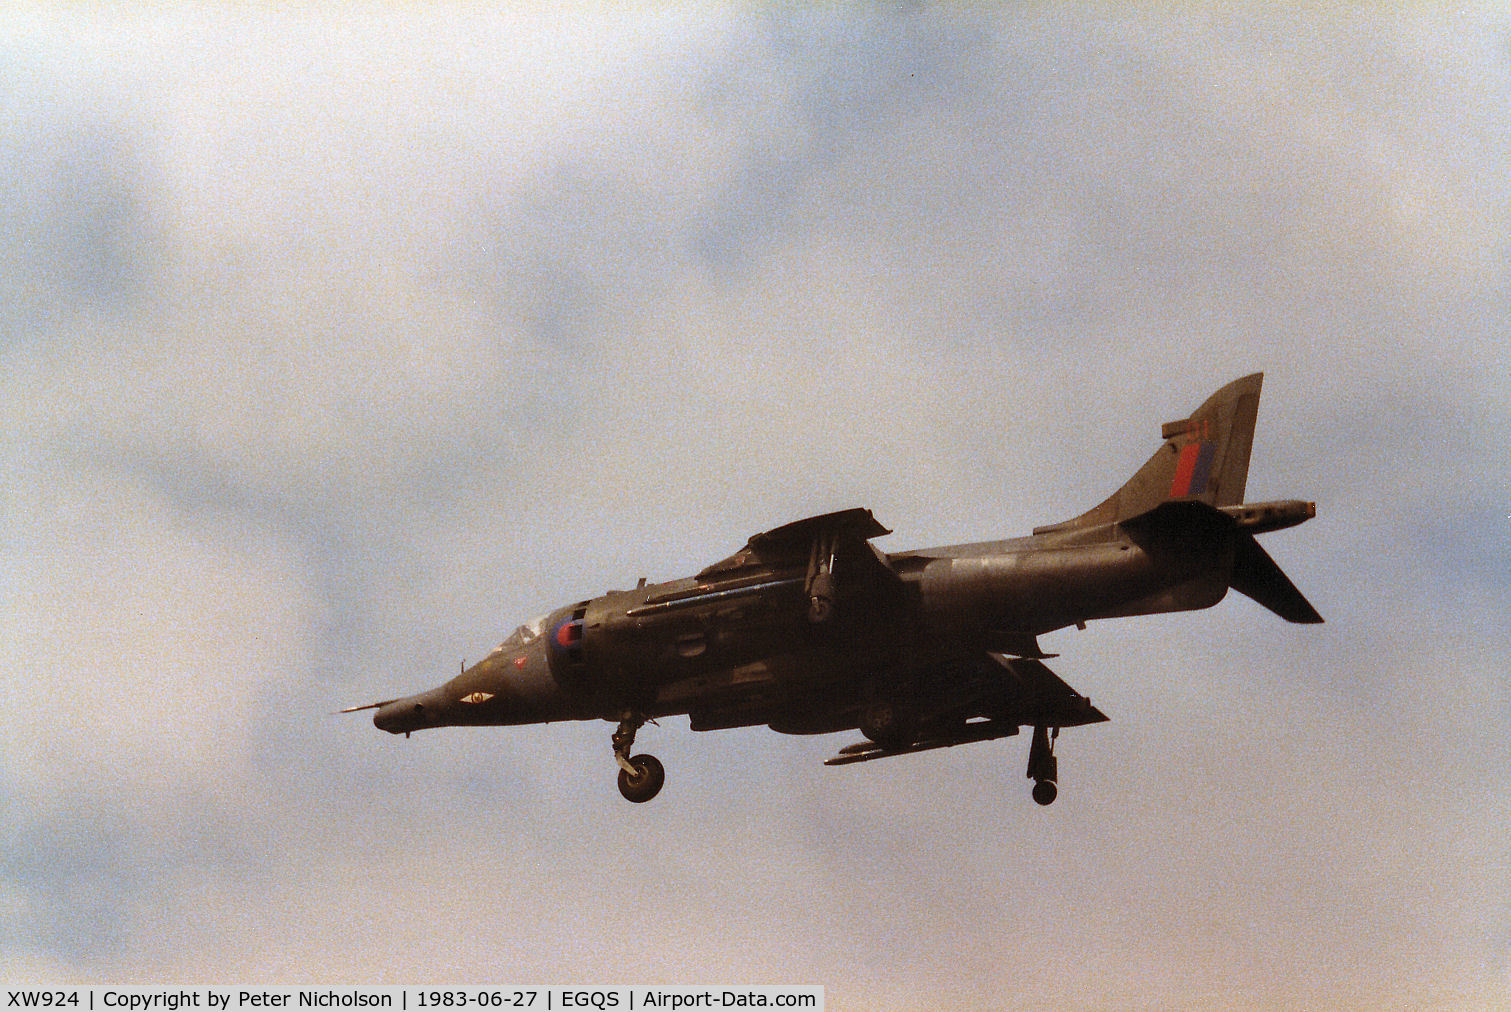 XW924, 1971 Hawker Siddeley Harrier GR.3 C/N 712079, Harrier GR.3 of 1 Squadron based at RAF Wittering on final approach to RAF Lossiemouth in the Summer of 1983.